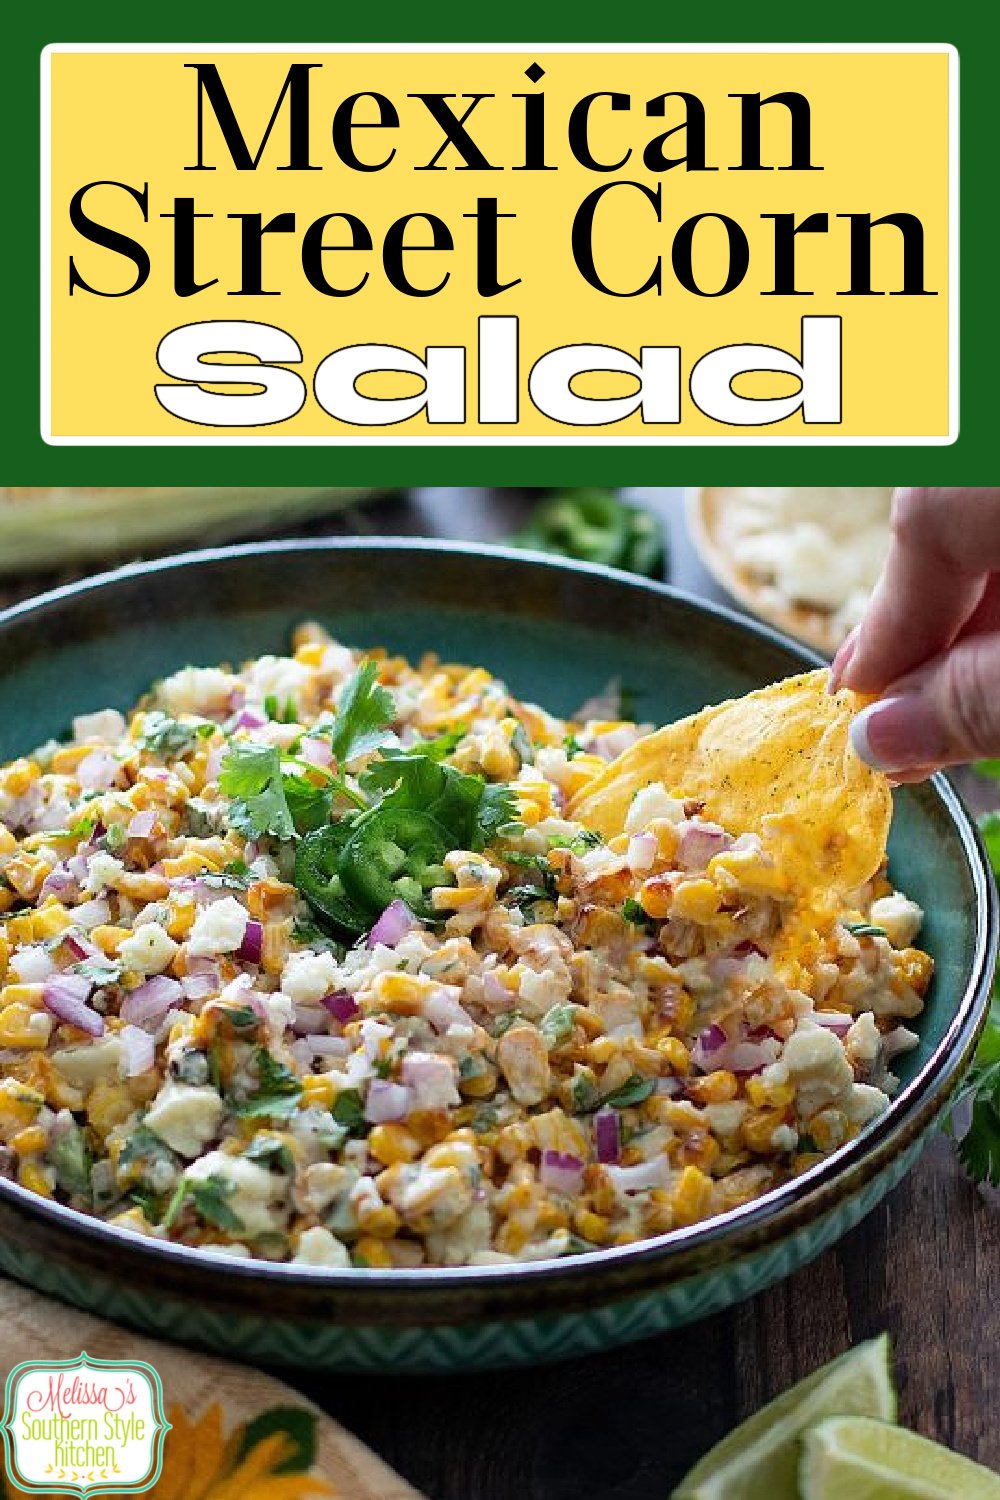 This Mexican Street Corn Salad can be used as a condiment for burrito bowls, salads or tacos and with tortilla chips for dipping #mexicanfood #mexicanstreetcorn #mexicanstreetcornsalad #cornsalad #freshcornrecipes #cornonthecob via @melissasssk